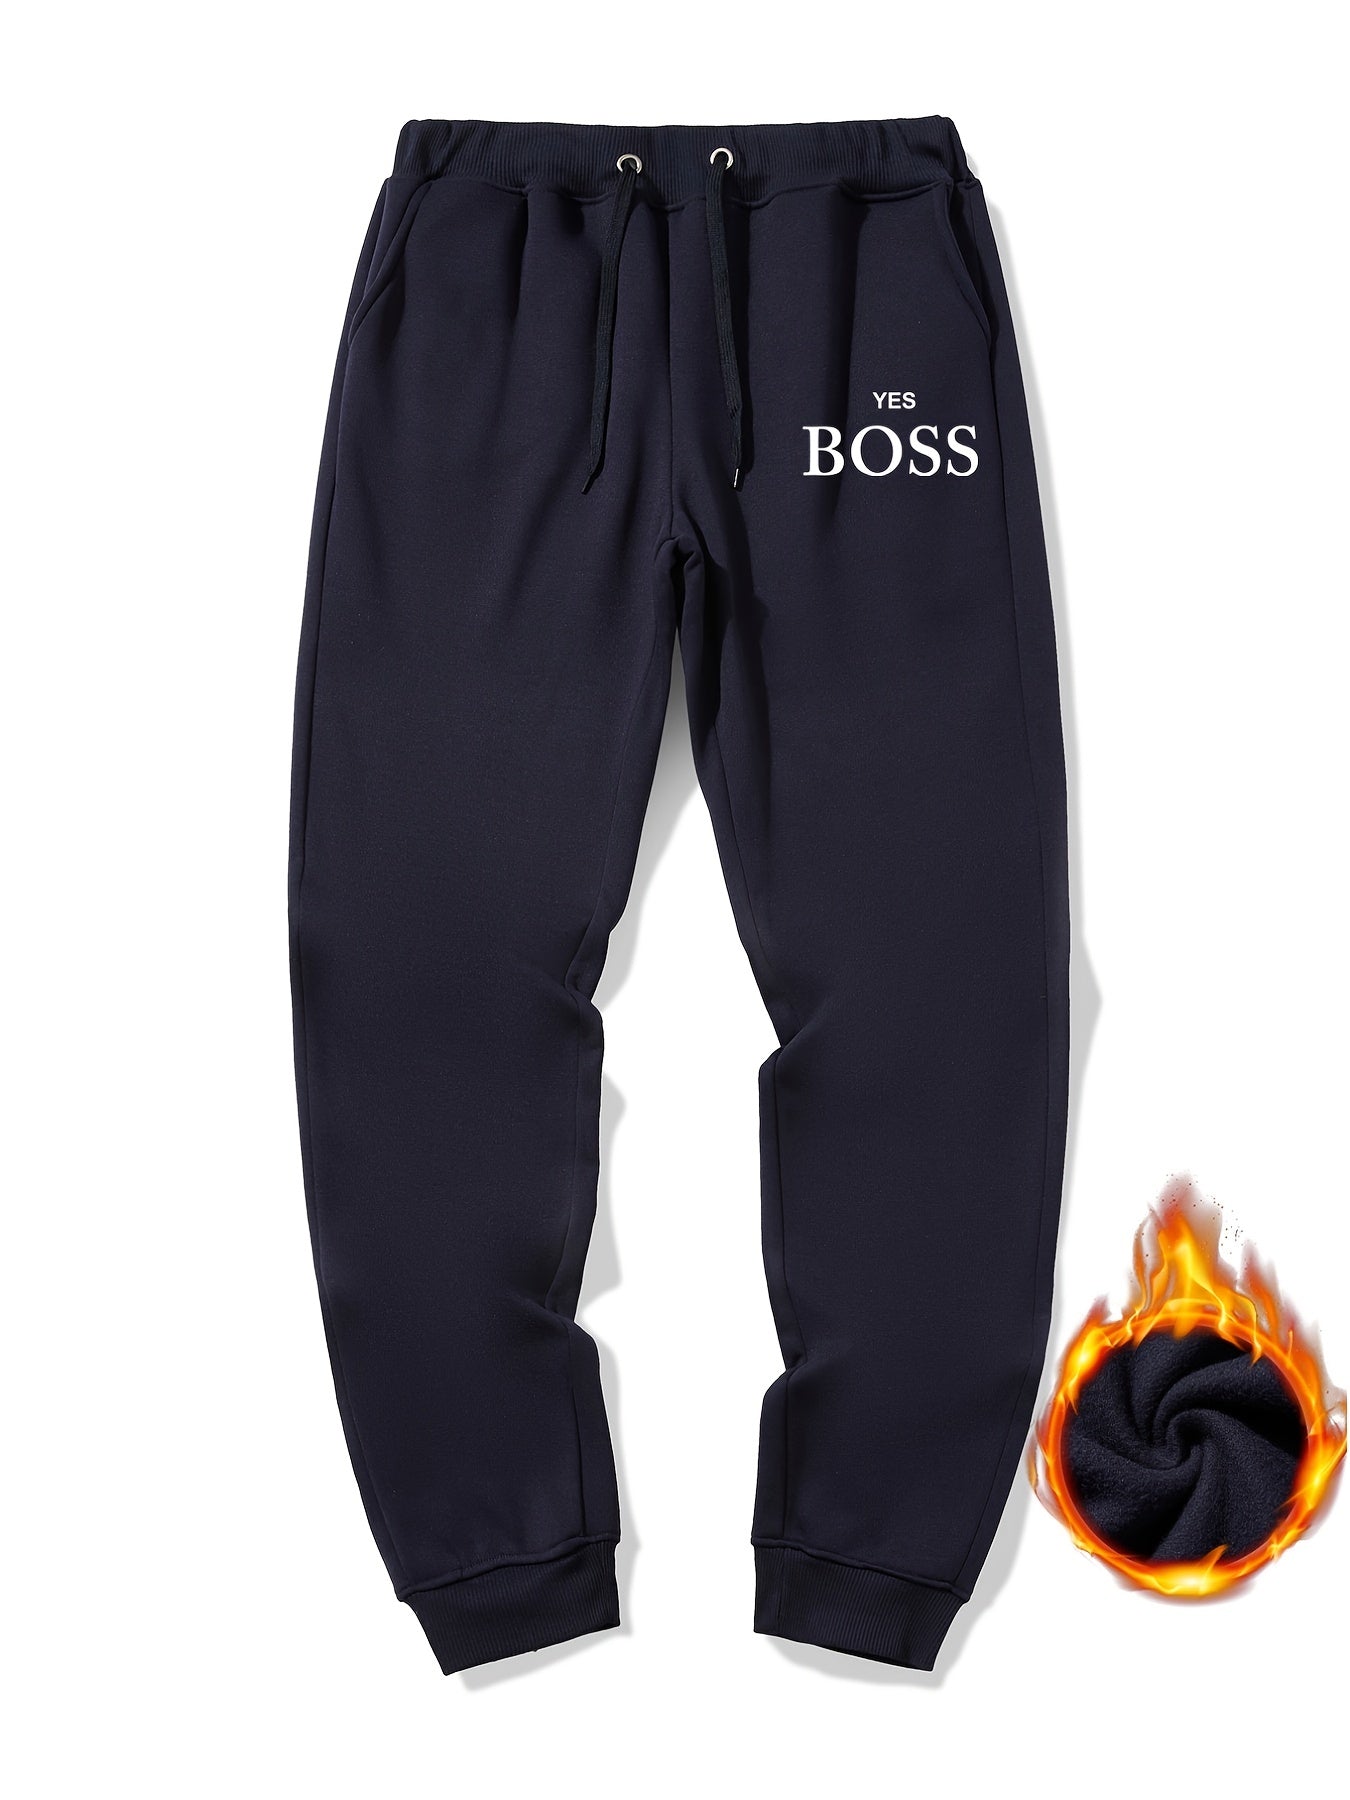 「lovevop」Men's Casual Sherpa Fleece Drawstring Active Sweatpants With "Yes, Boss" Best Sellers